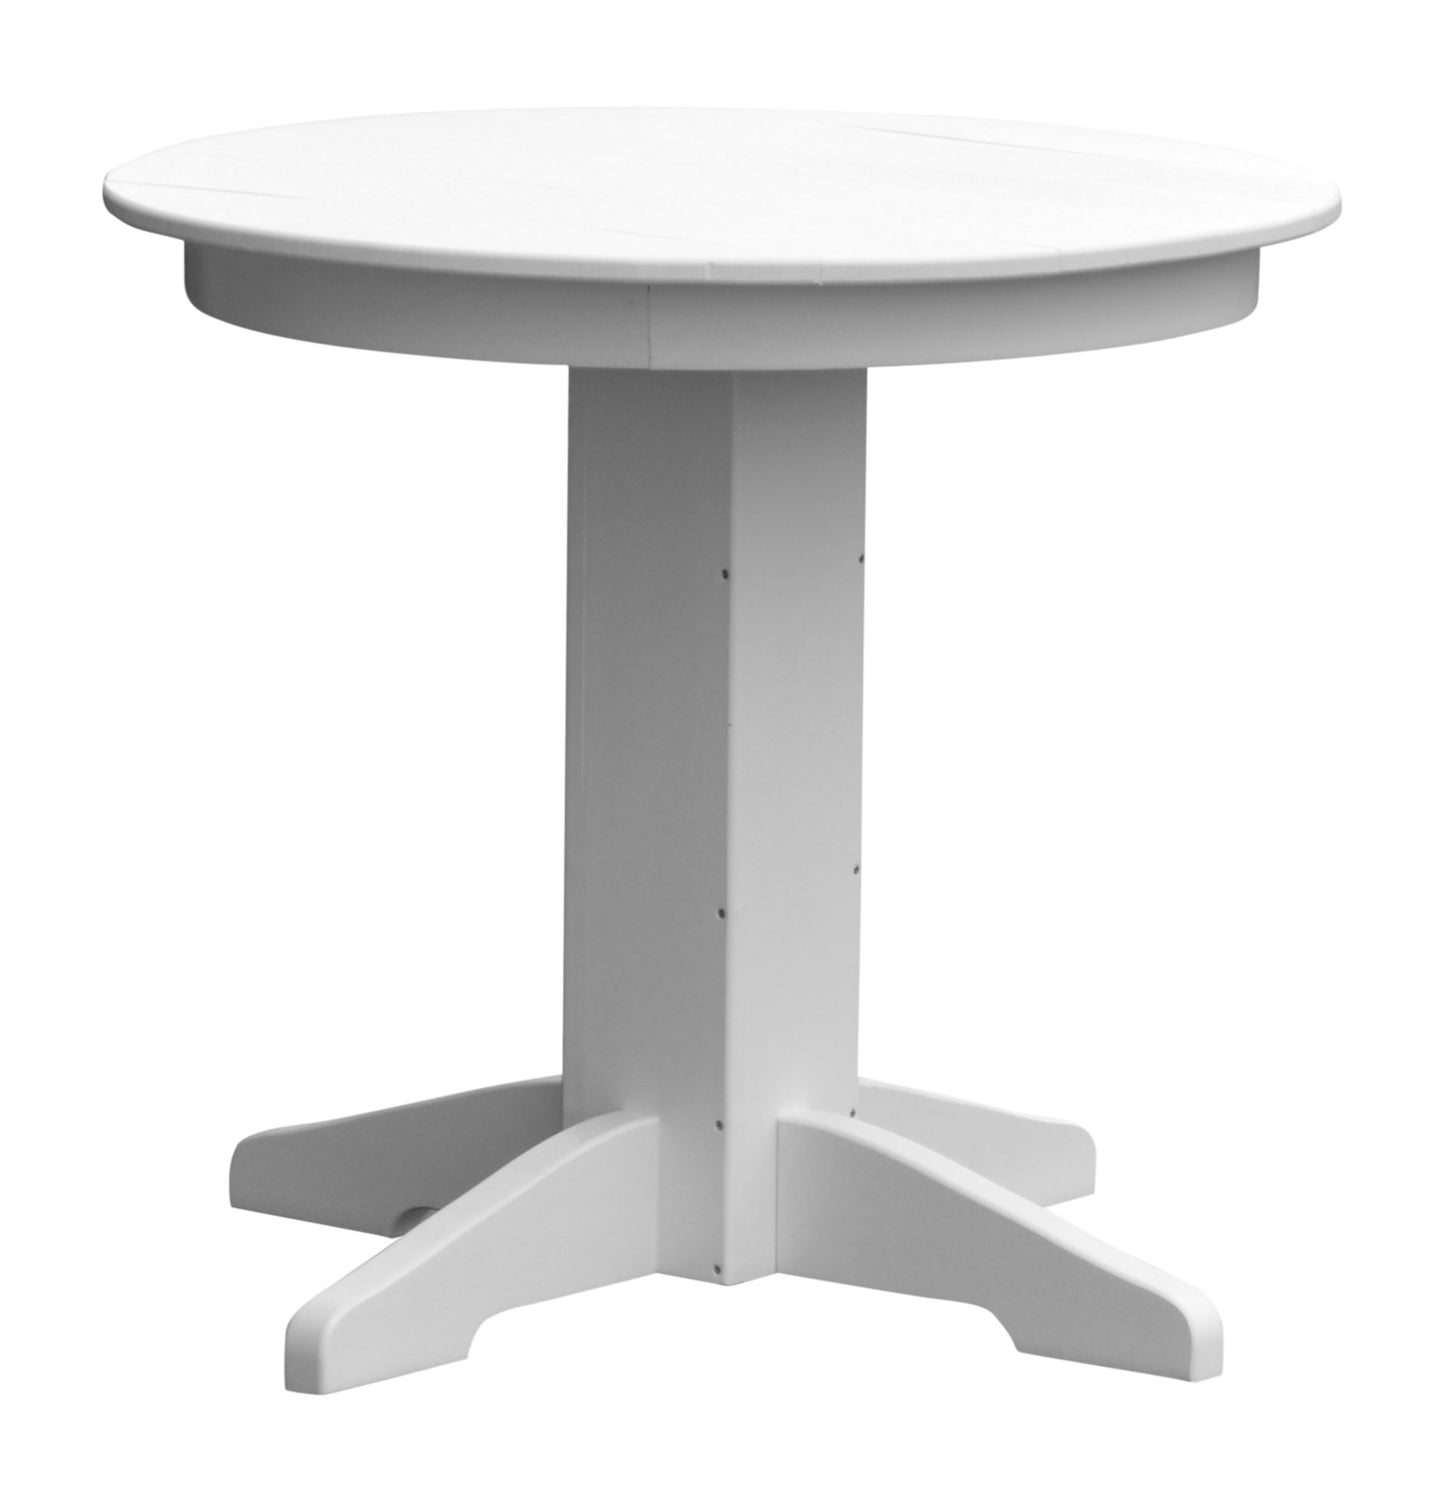 A&L Furniture Recycled Plastic 33" Round Dining Table - White